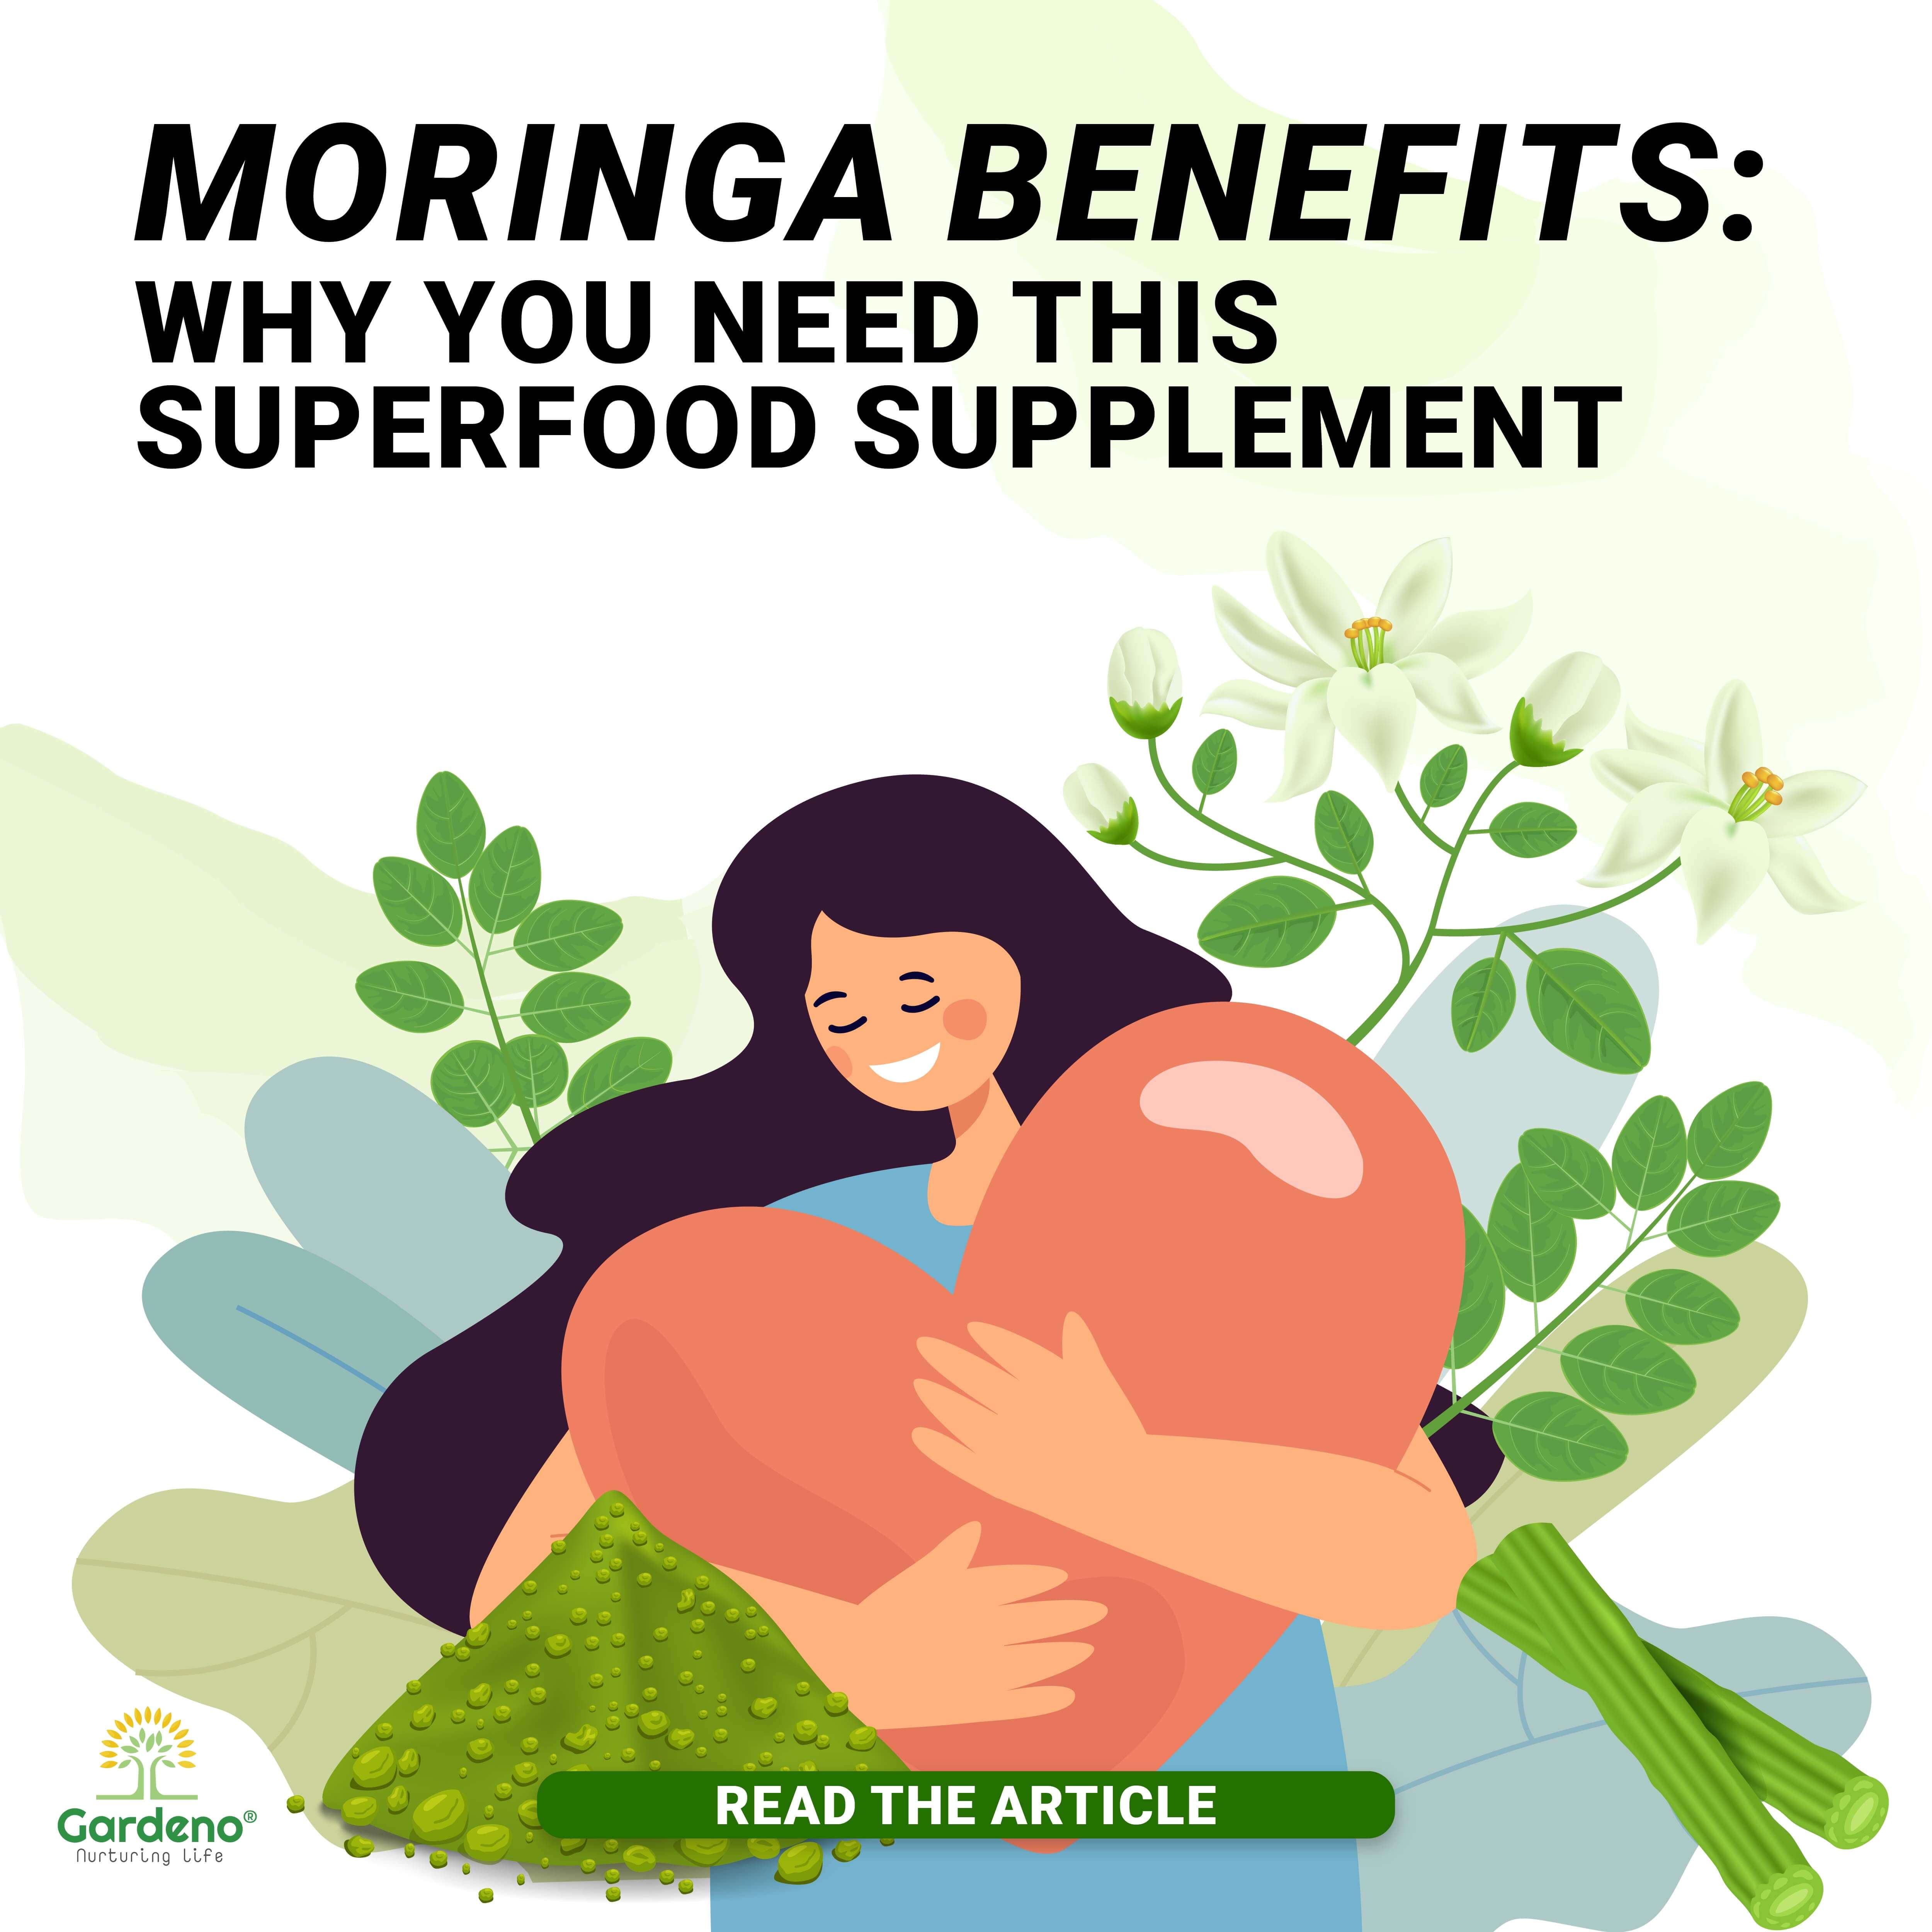 Moringa Benefits: Why You Need This Superfood Supplement